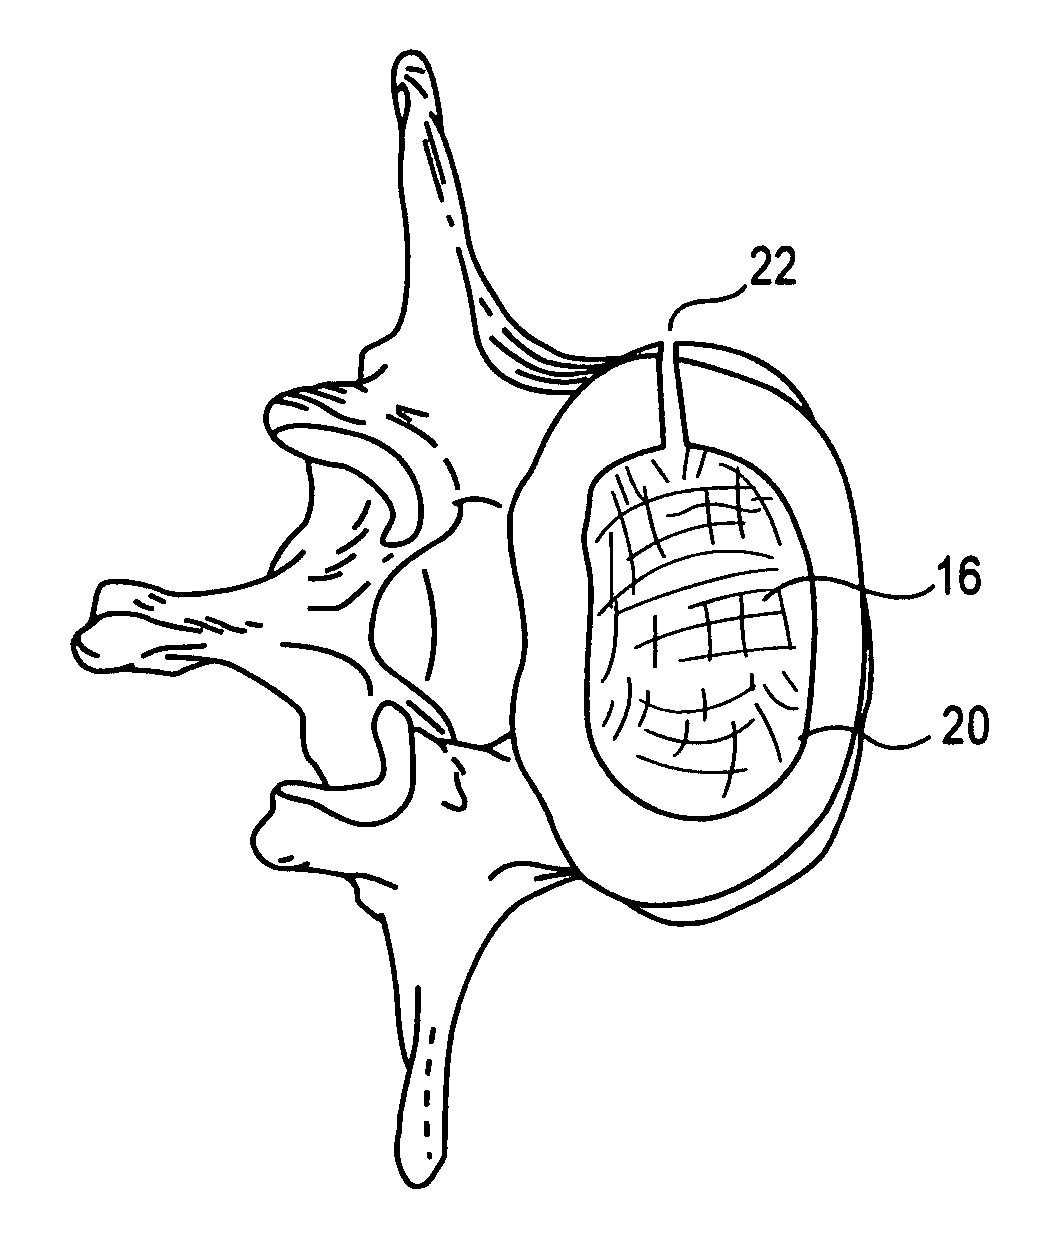 Packed demineralized cancellous tissue forms for disc nucleus augmentation, restoration, or replacement and methods of implantation